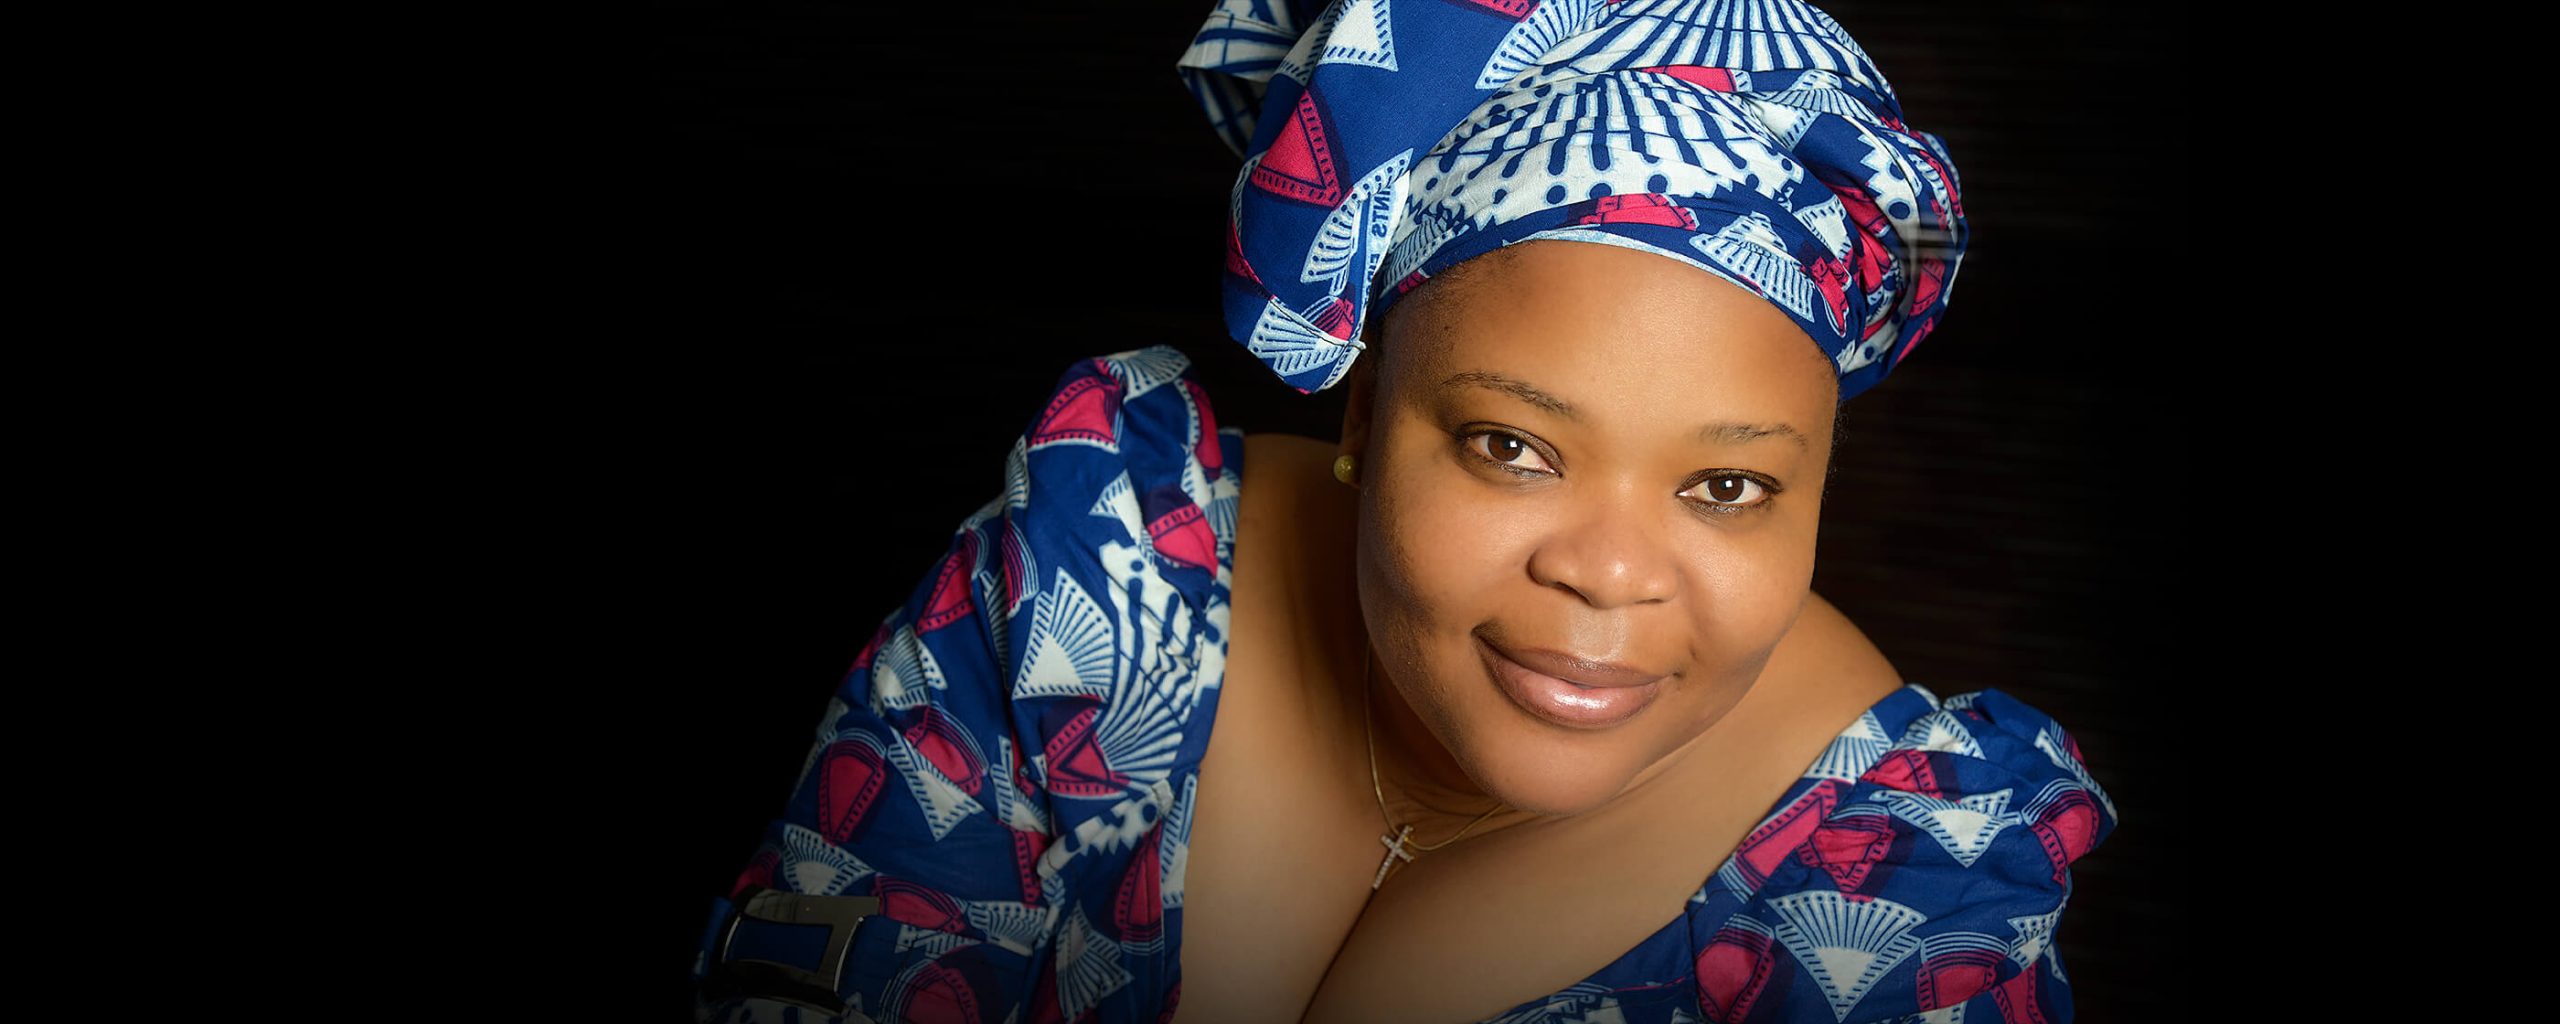 LEYMAH GBOWEE (1972- ) – Liberian peace activist, author, and 2011 Nobel Prize winner - African Leaders Magazine 